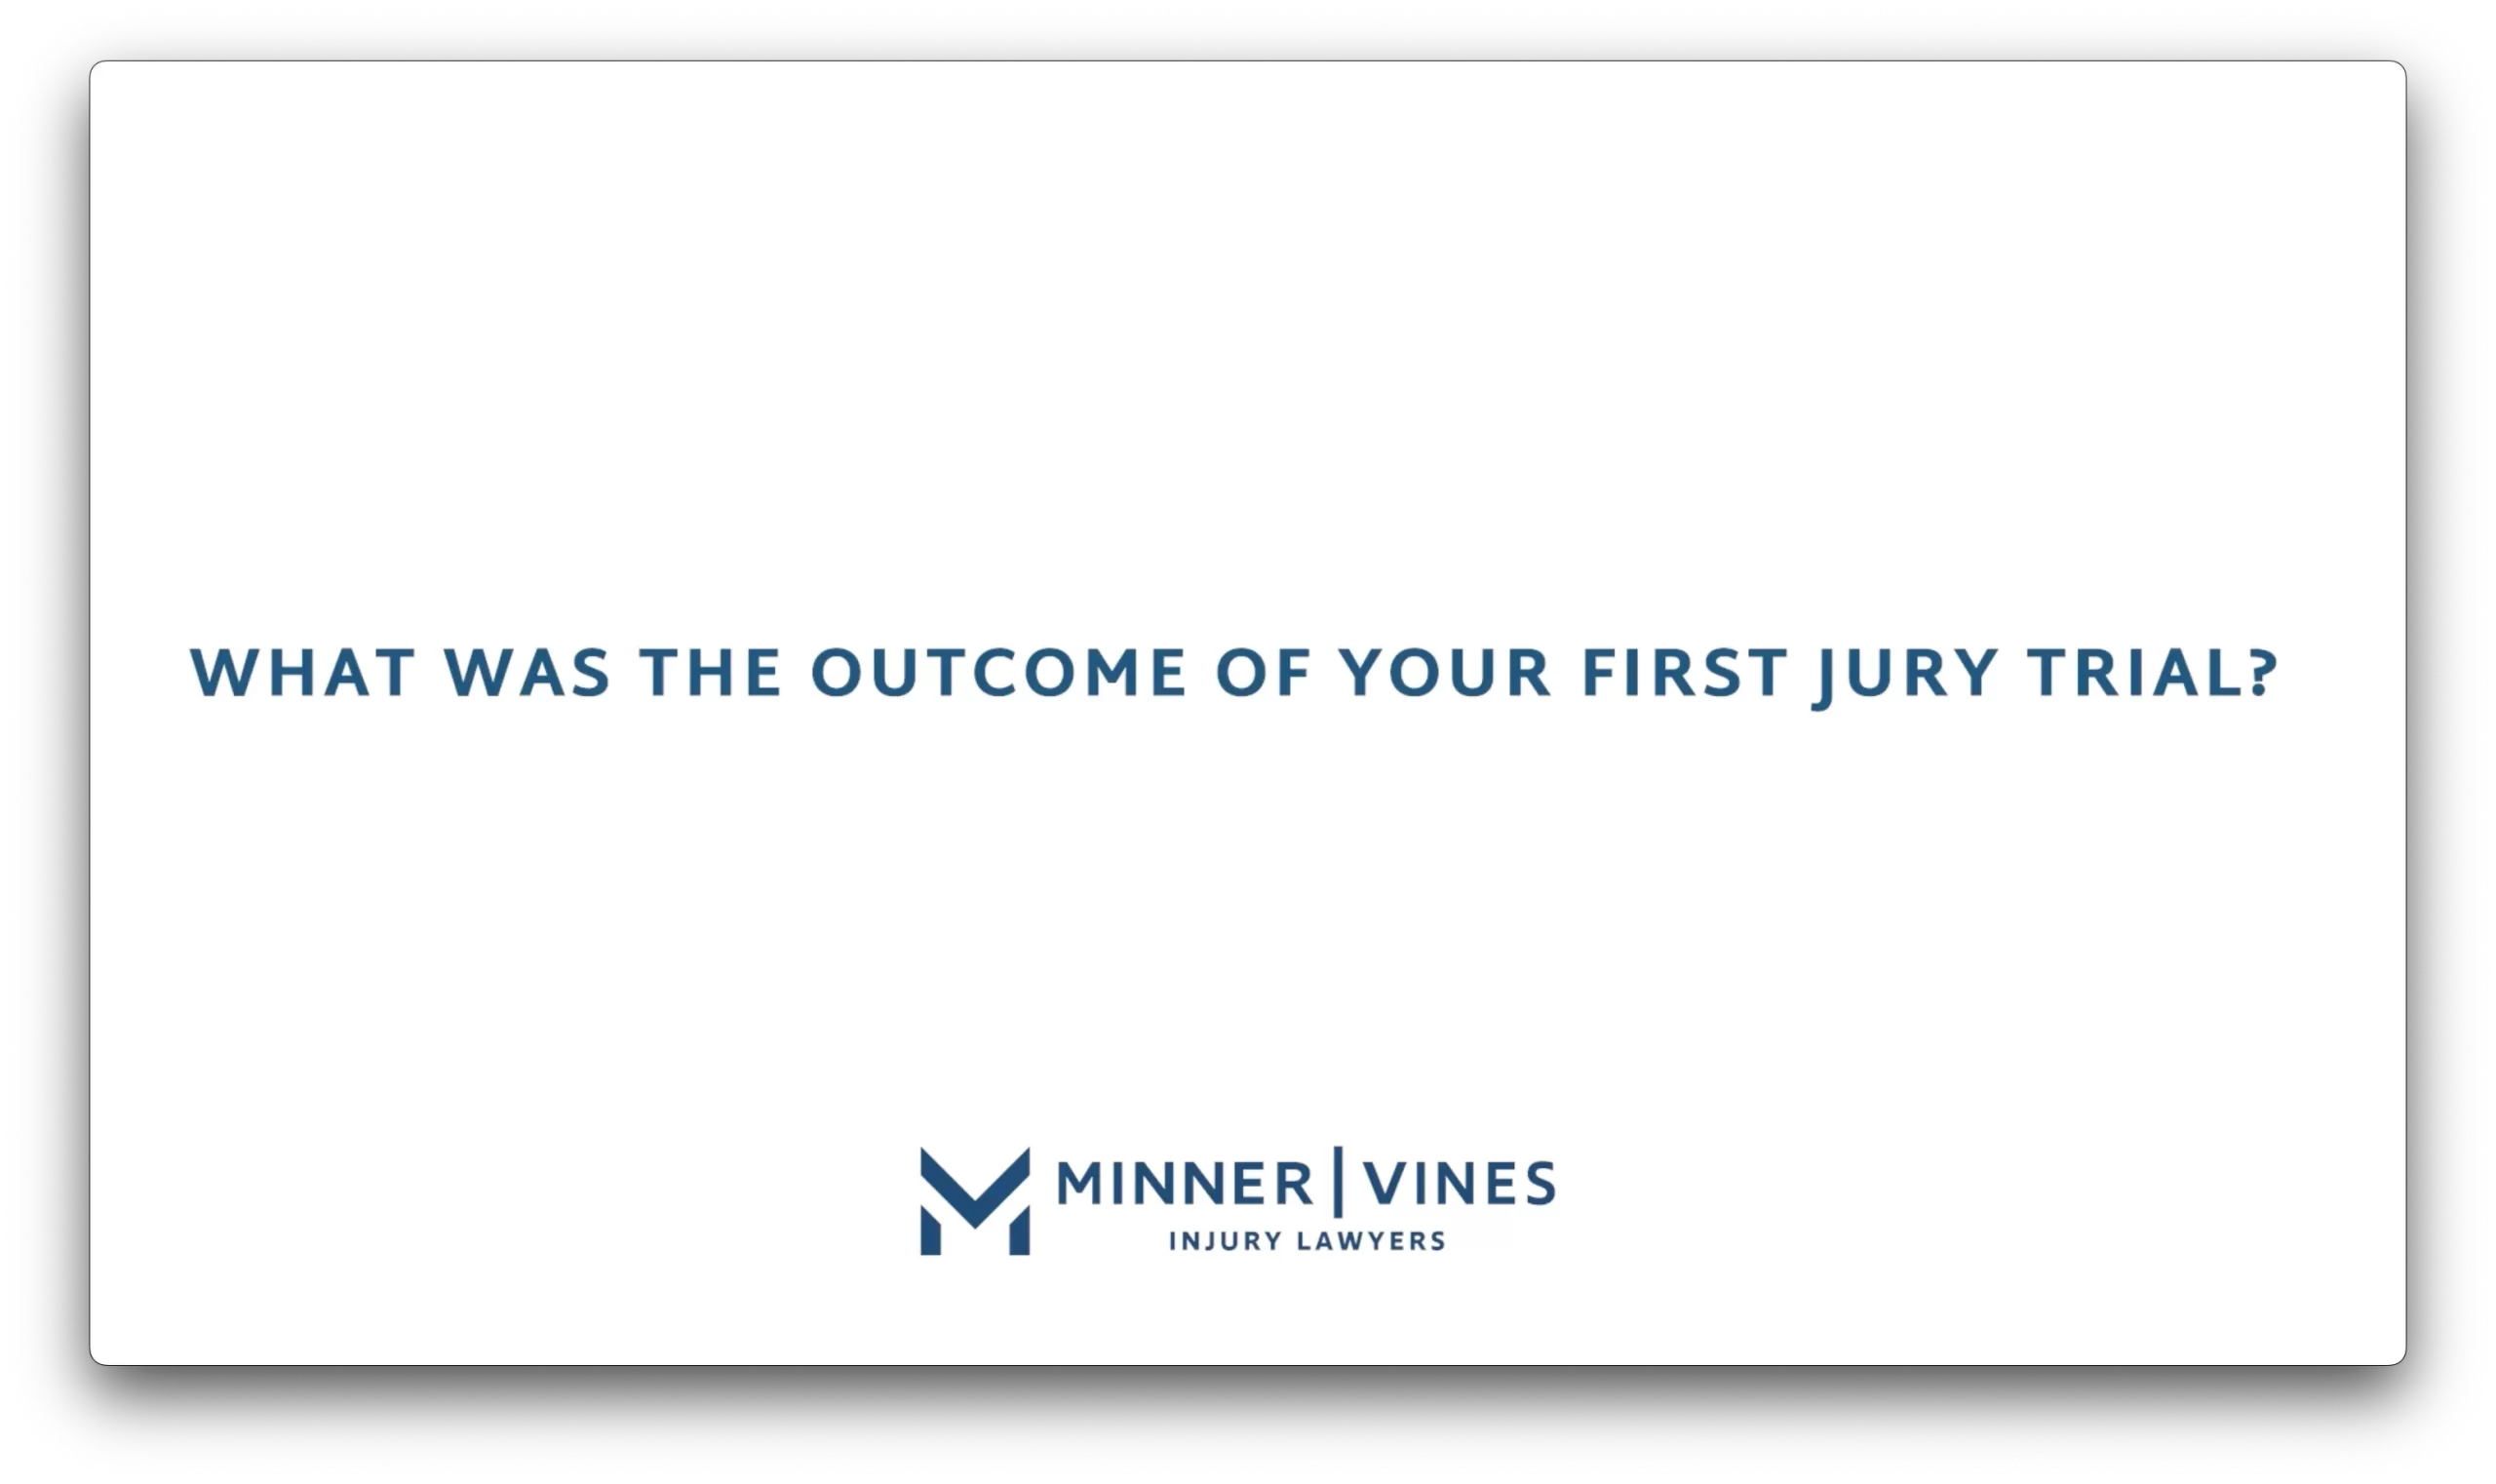 What was the outcome of your first jury trial?